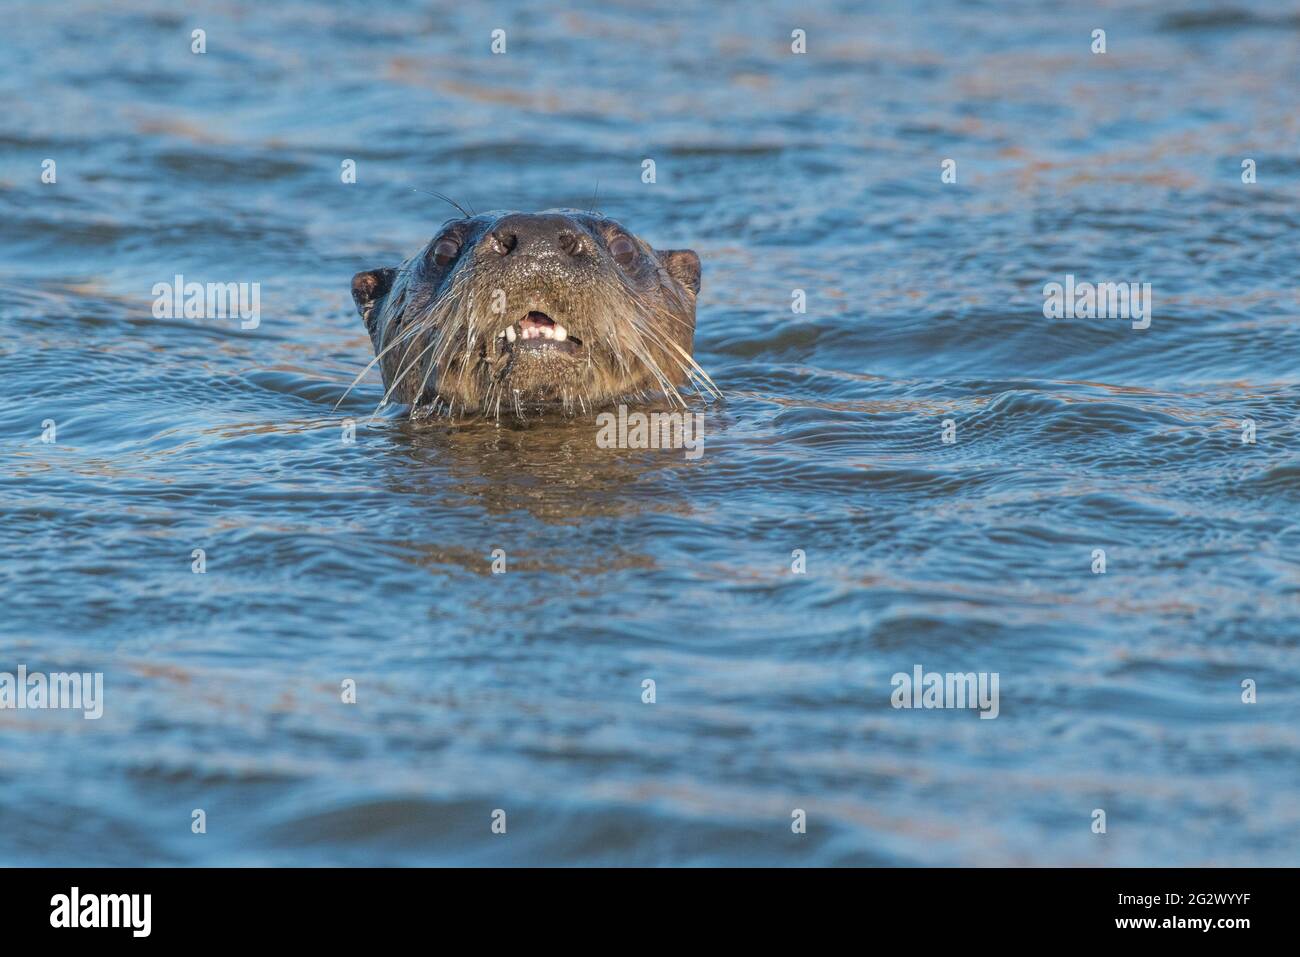 North American river otter (Lontra canadensis)) swimming in a canal in Yolo bypass wildlife area right near Sacramento, California. Stock Photo